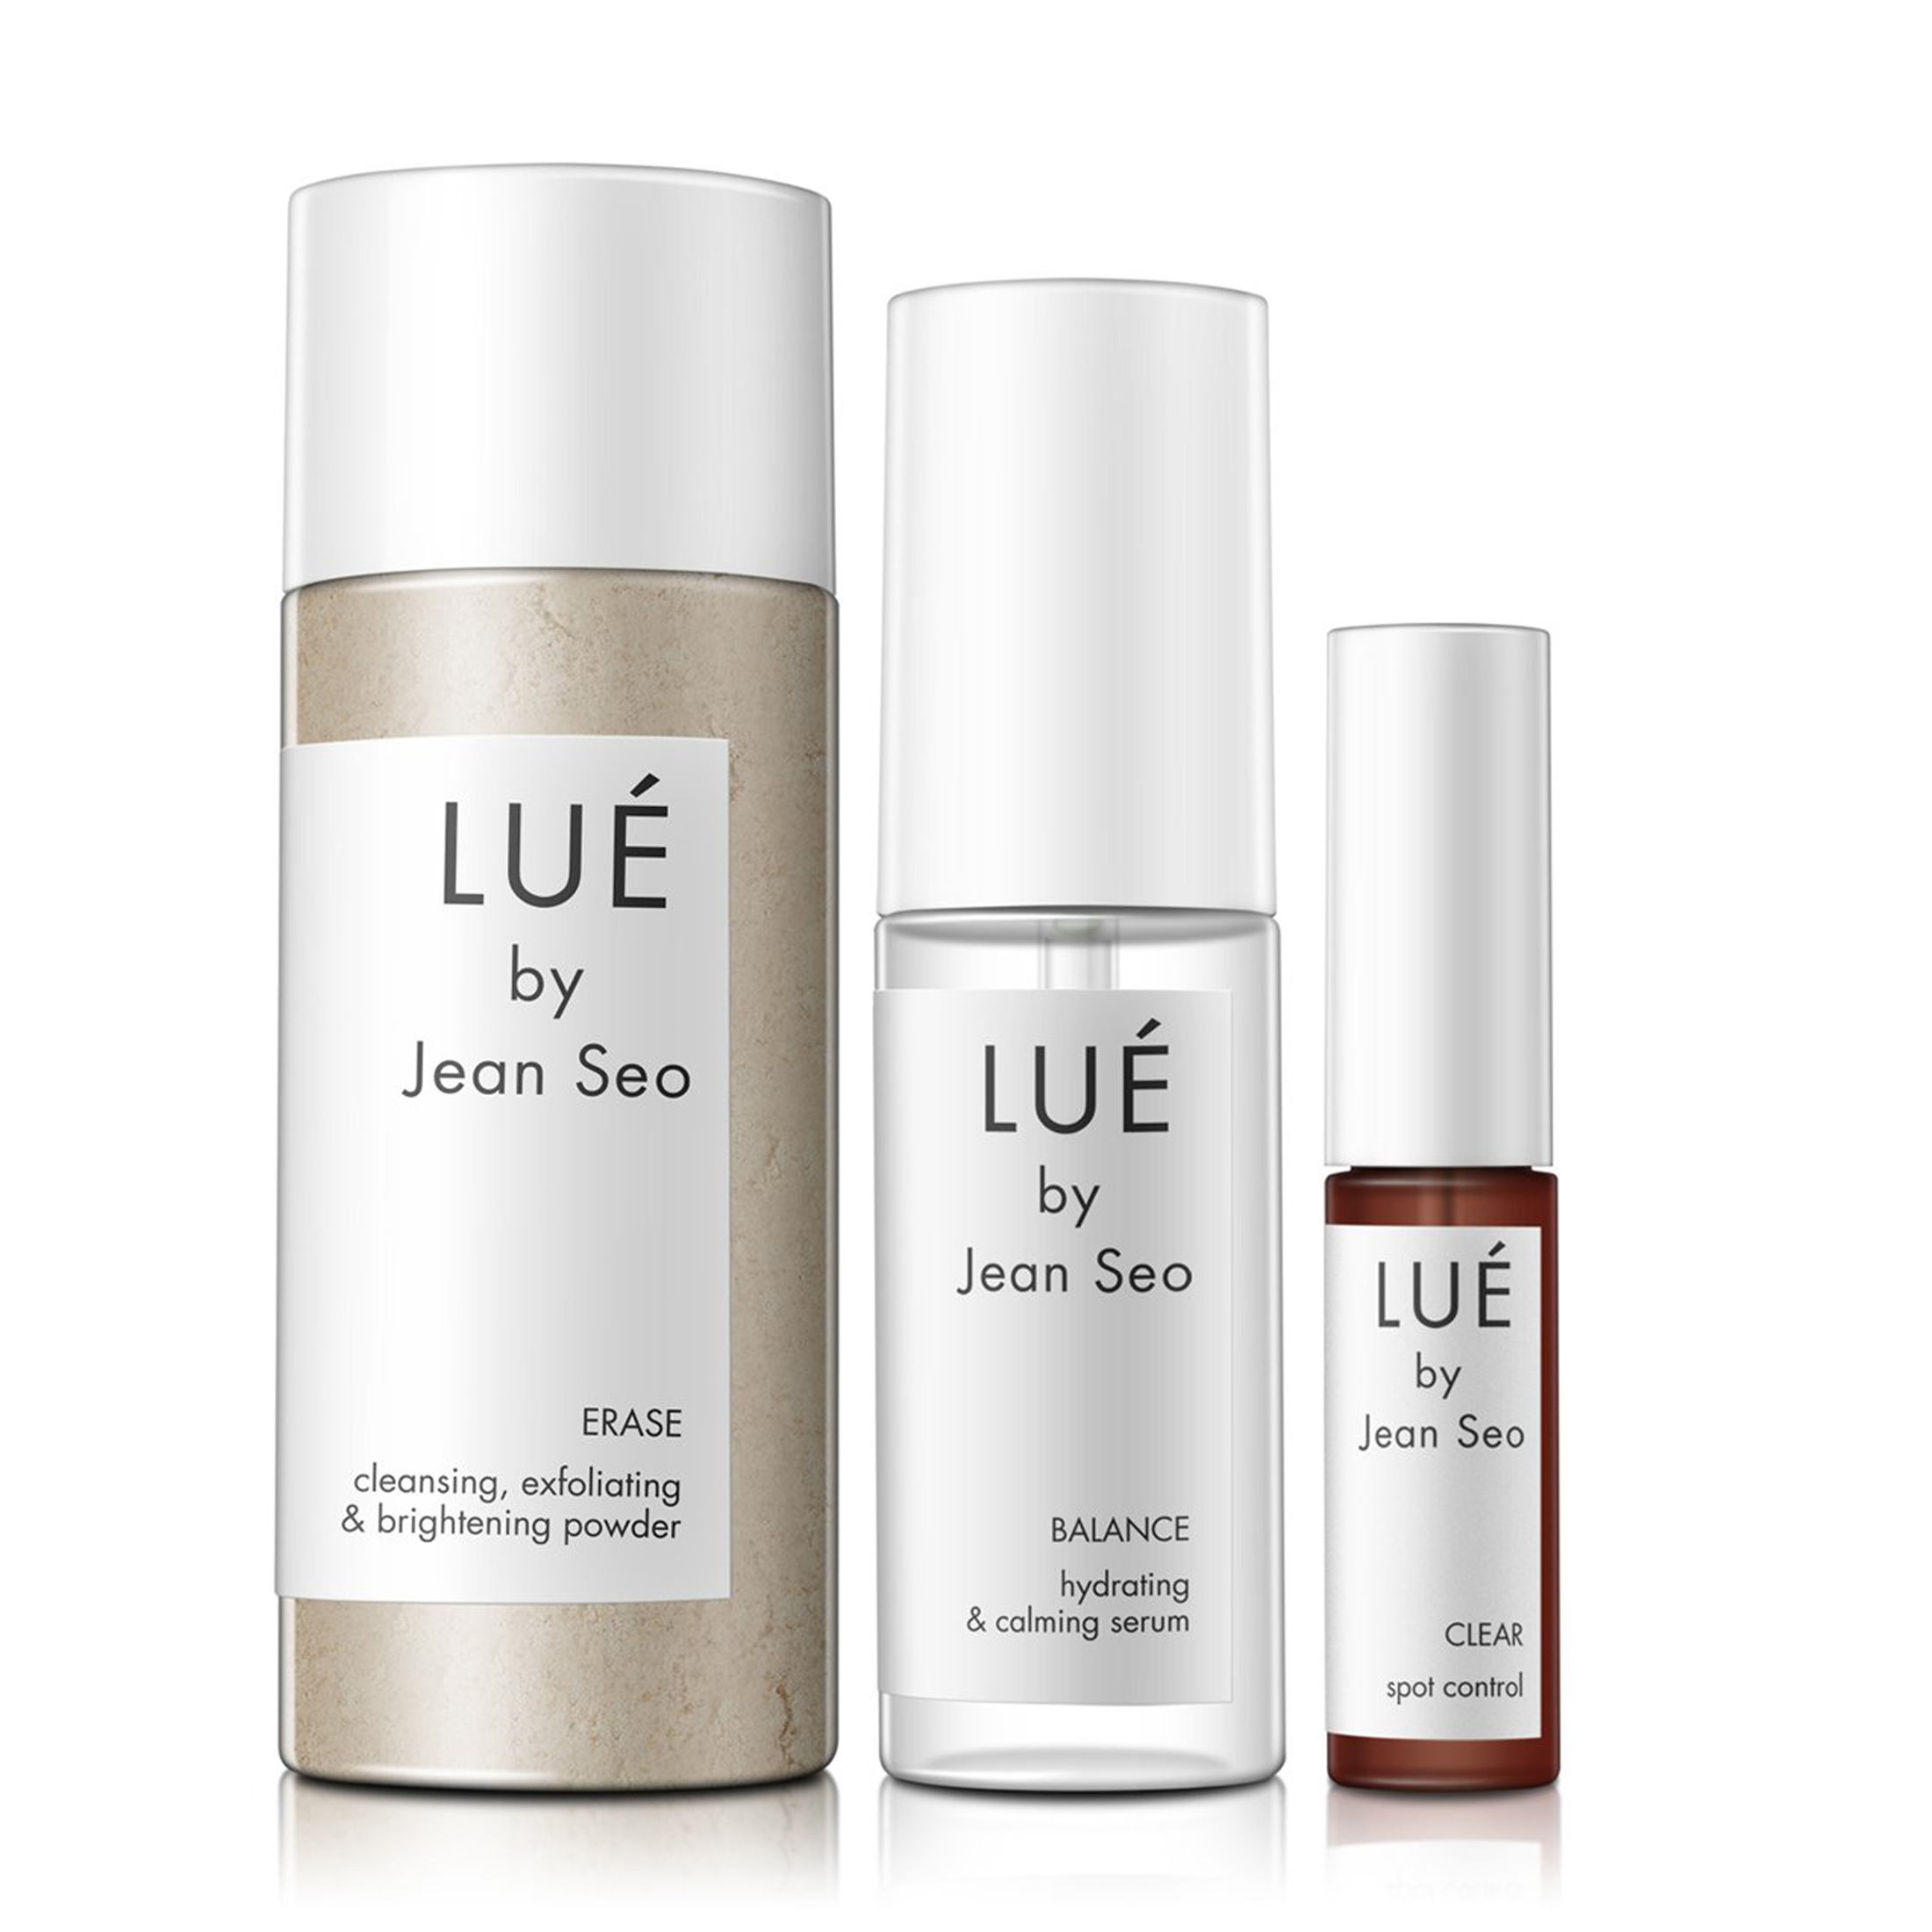 Lue by Jean Seo Skin Solution Set, Cleanse, Moisturize, Control, All Skin Types, Organic & Non-Gmo, Acne & Irritations - image 1 of 5